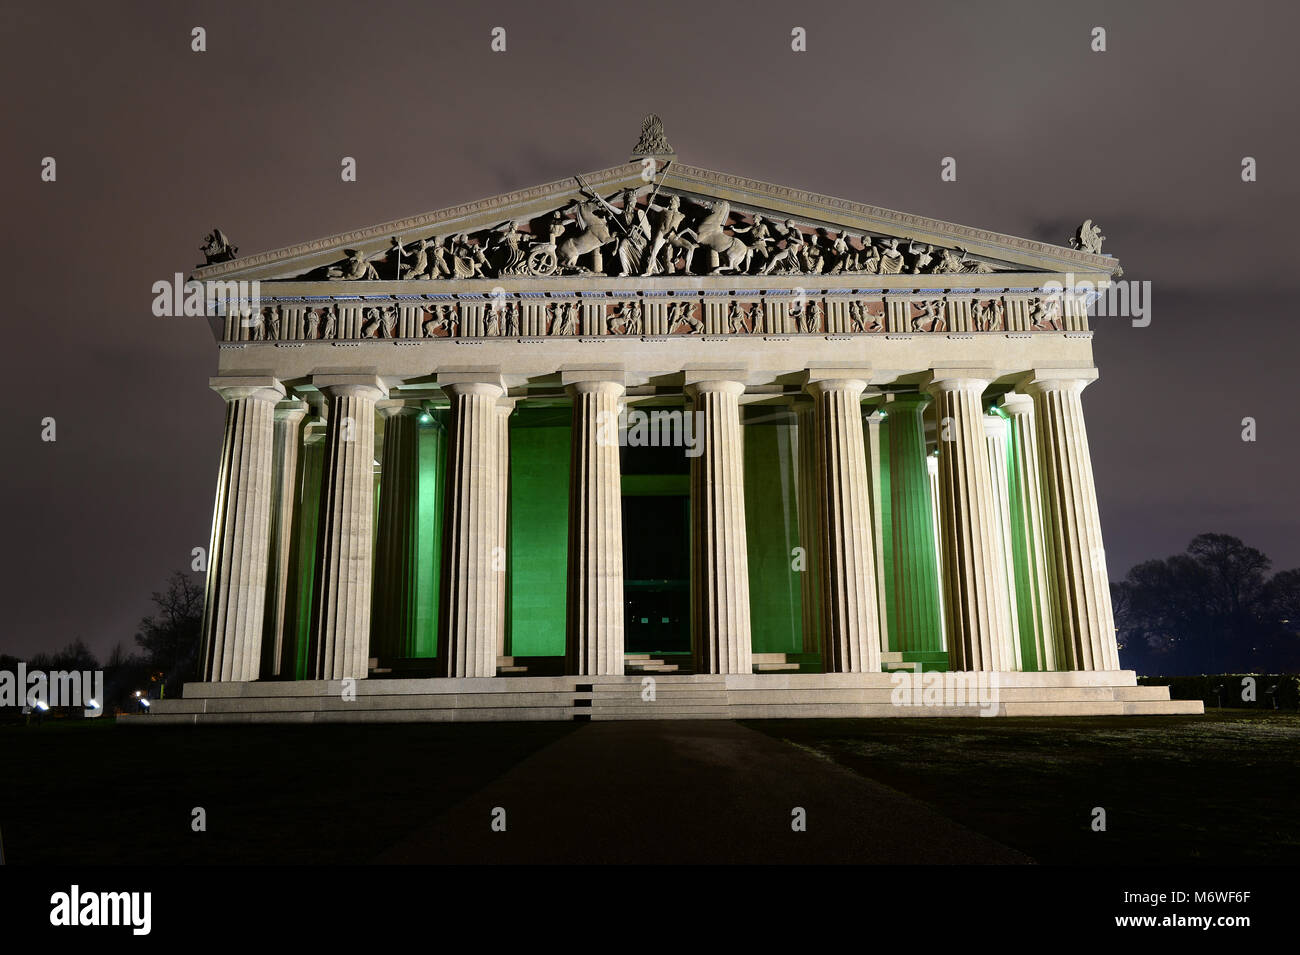 view of Parthenon replica at Centennial Park in Nashville, Tennessee at night Stock Photo